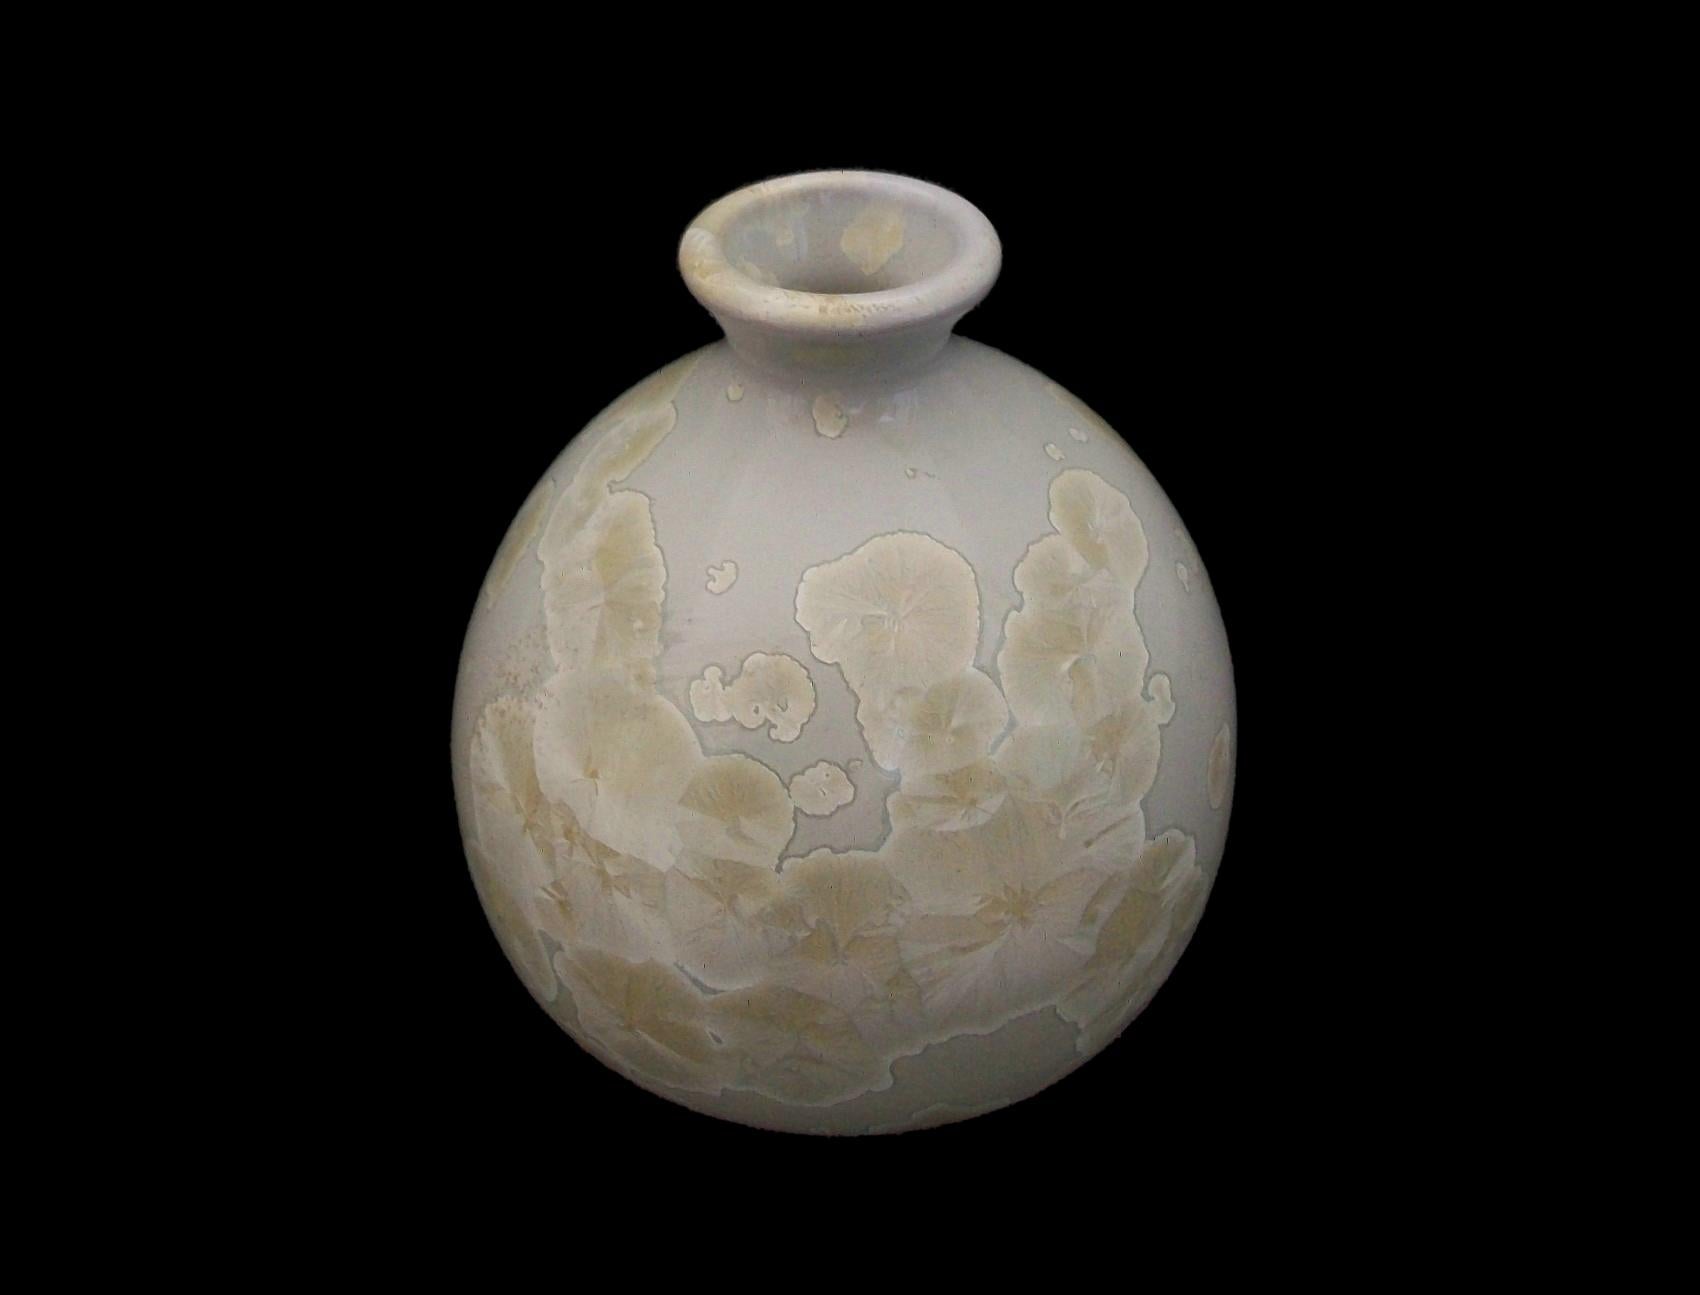 Midcentury studio pottery vase with crystalline glaze - hand made featuring a wheel thrown white clay body with artistic distribution of crystal formations within the beige glaze - unglazed base - signed on the base (Woodhill) - Canada (likely) -